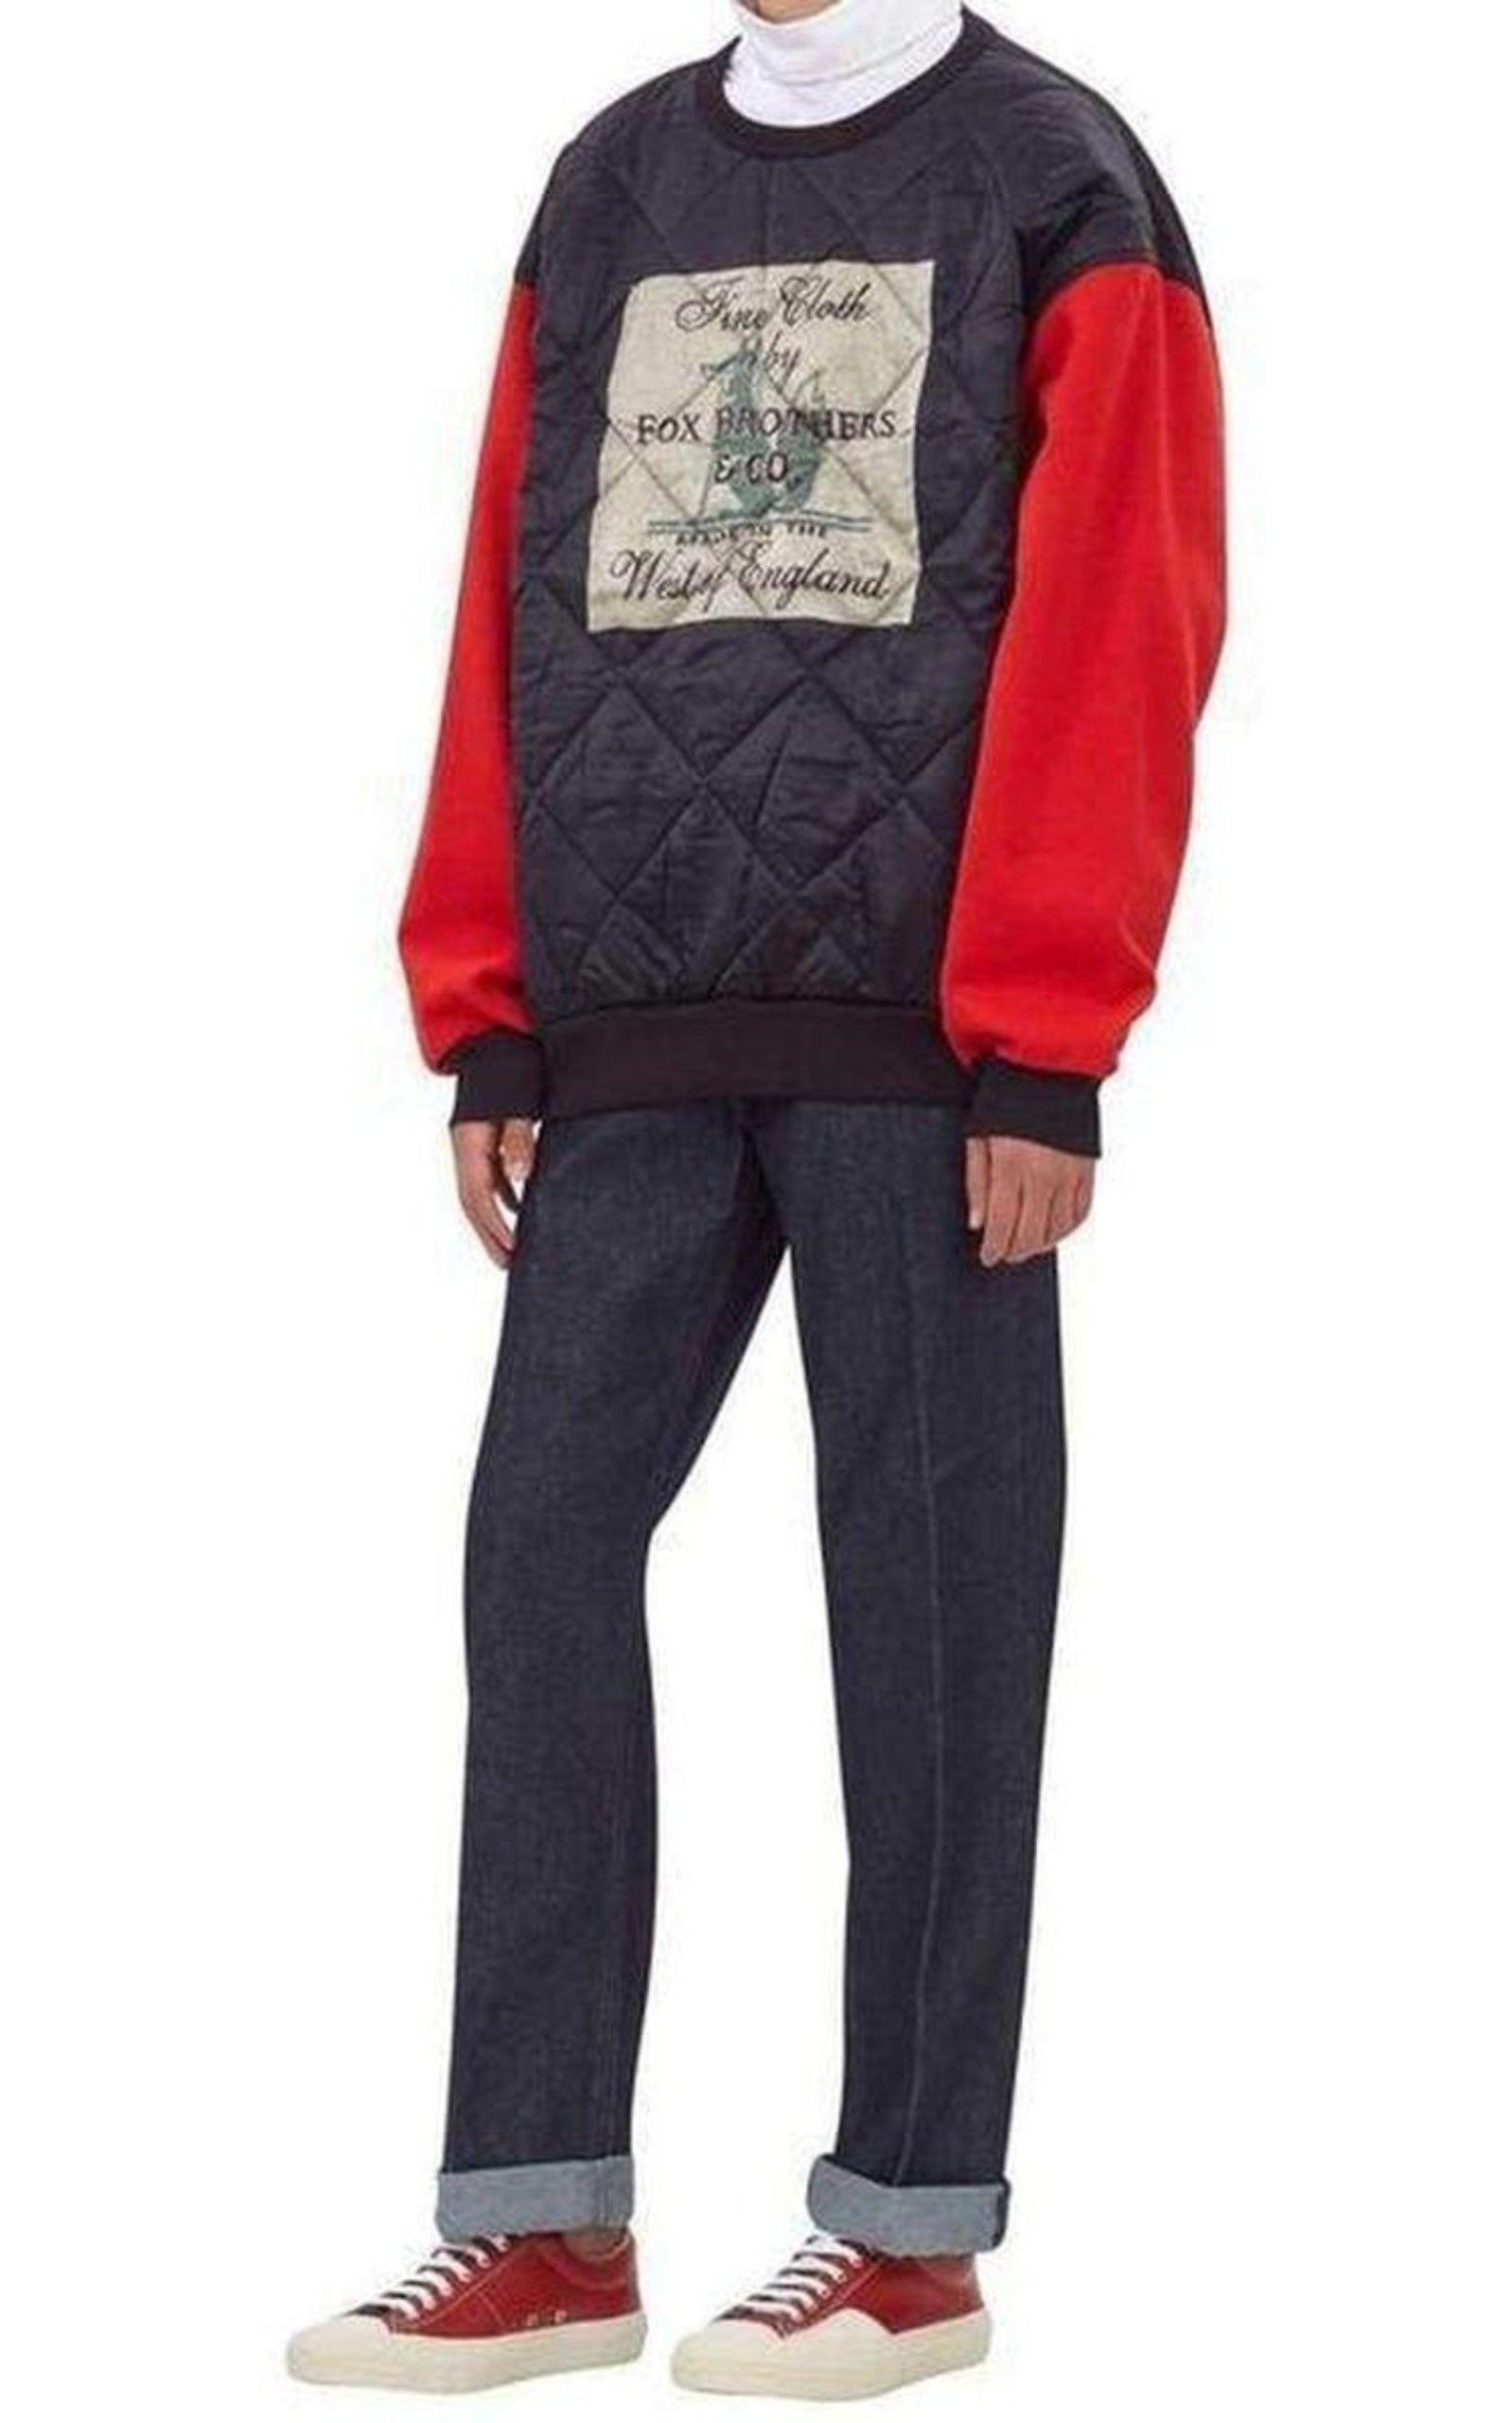 Fox Brothers Quilted Cotton Sweatshirt - 2